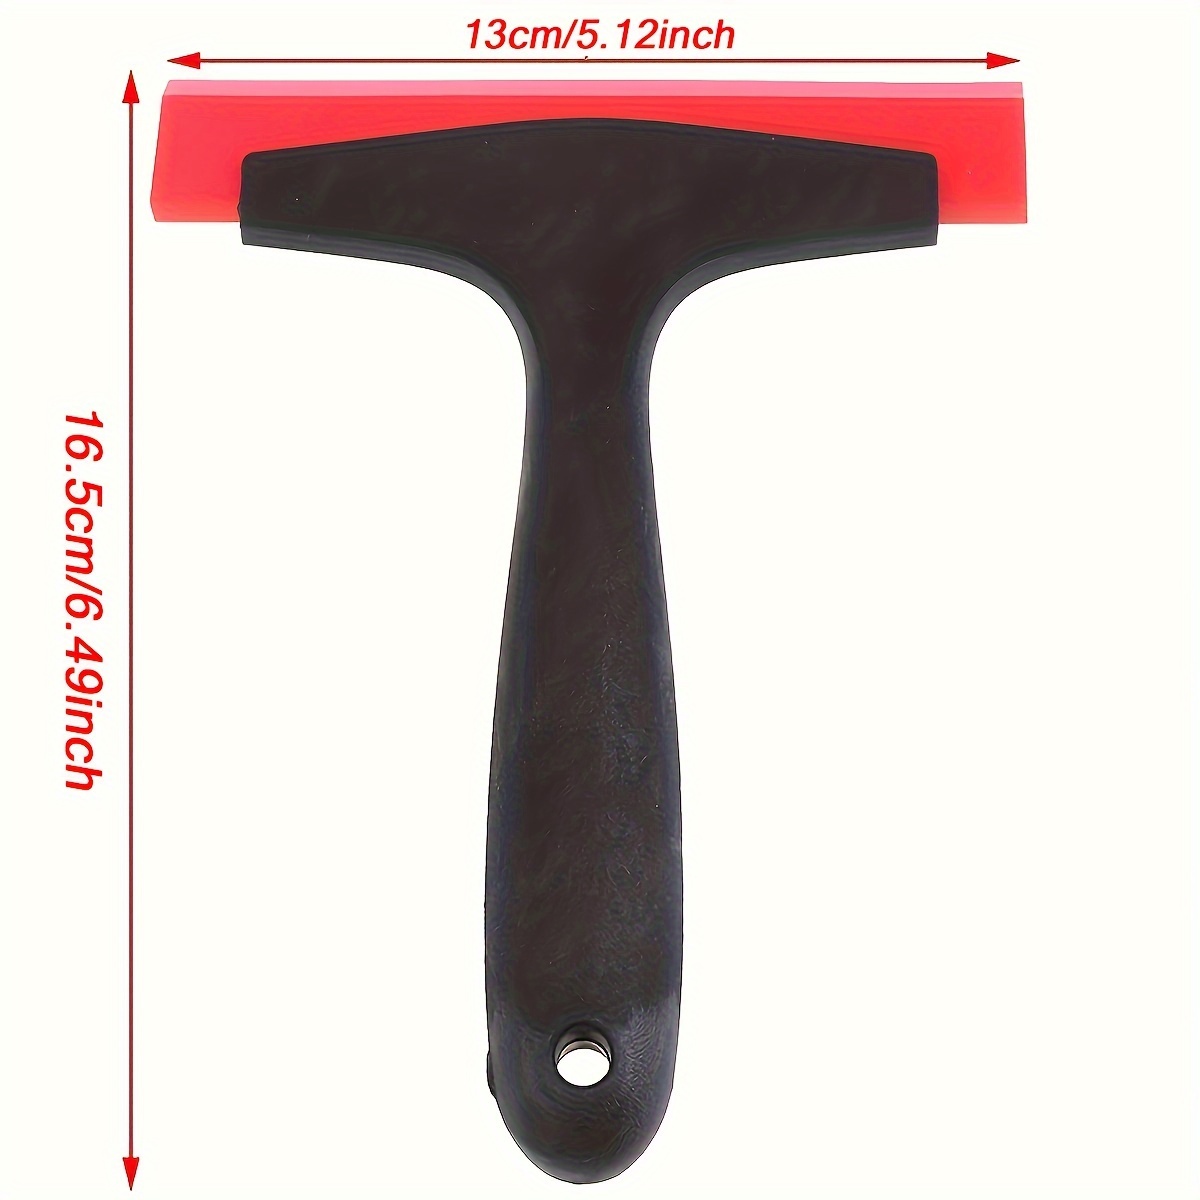 AEZON Rubber Handle, Used for Car Window Film Tool, Car